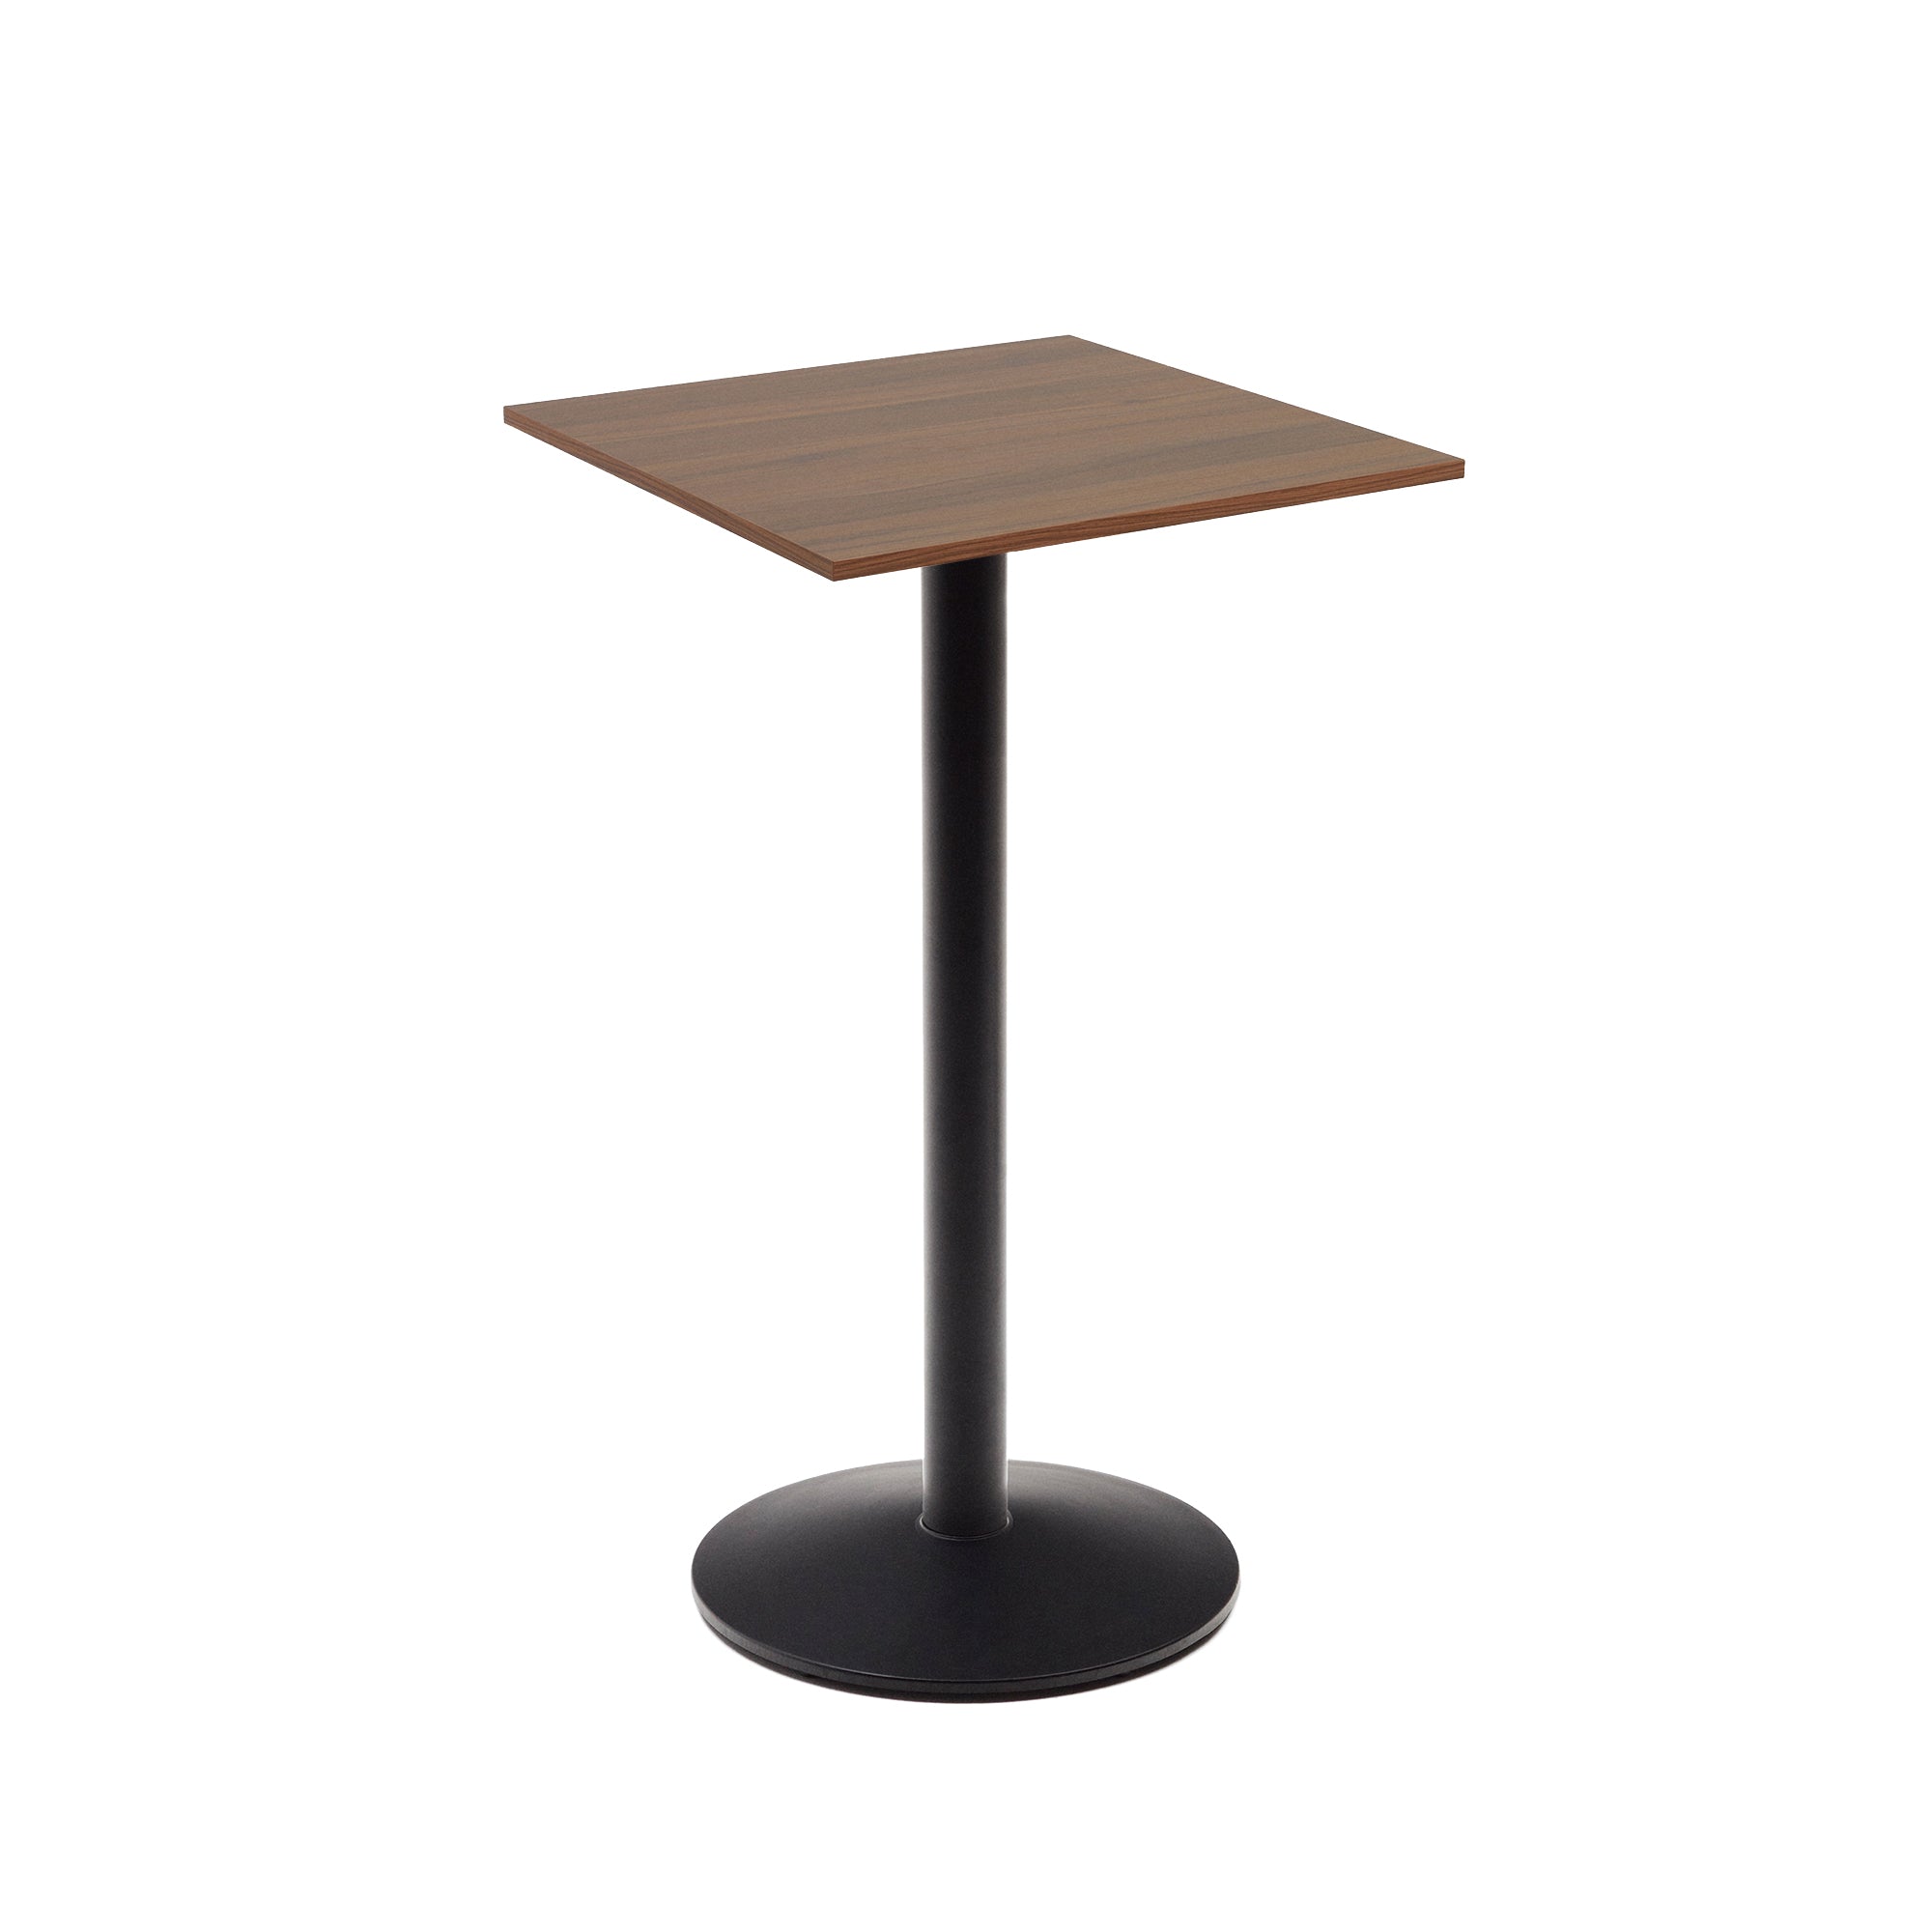 Esilda high table in walnut finish melamine with metal leg in a painted black finish, 60x60x96 cm